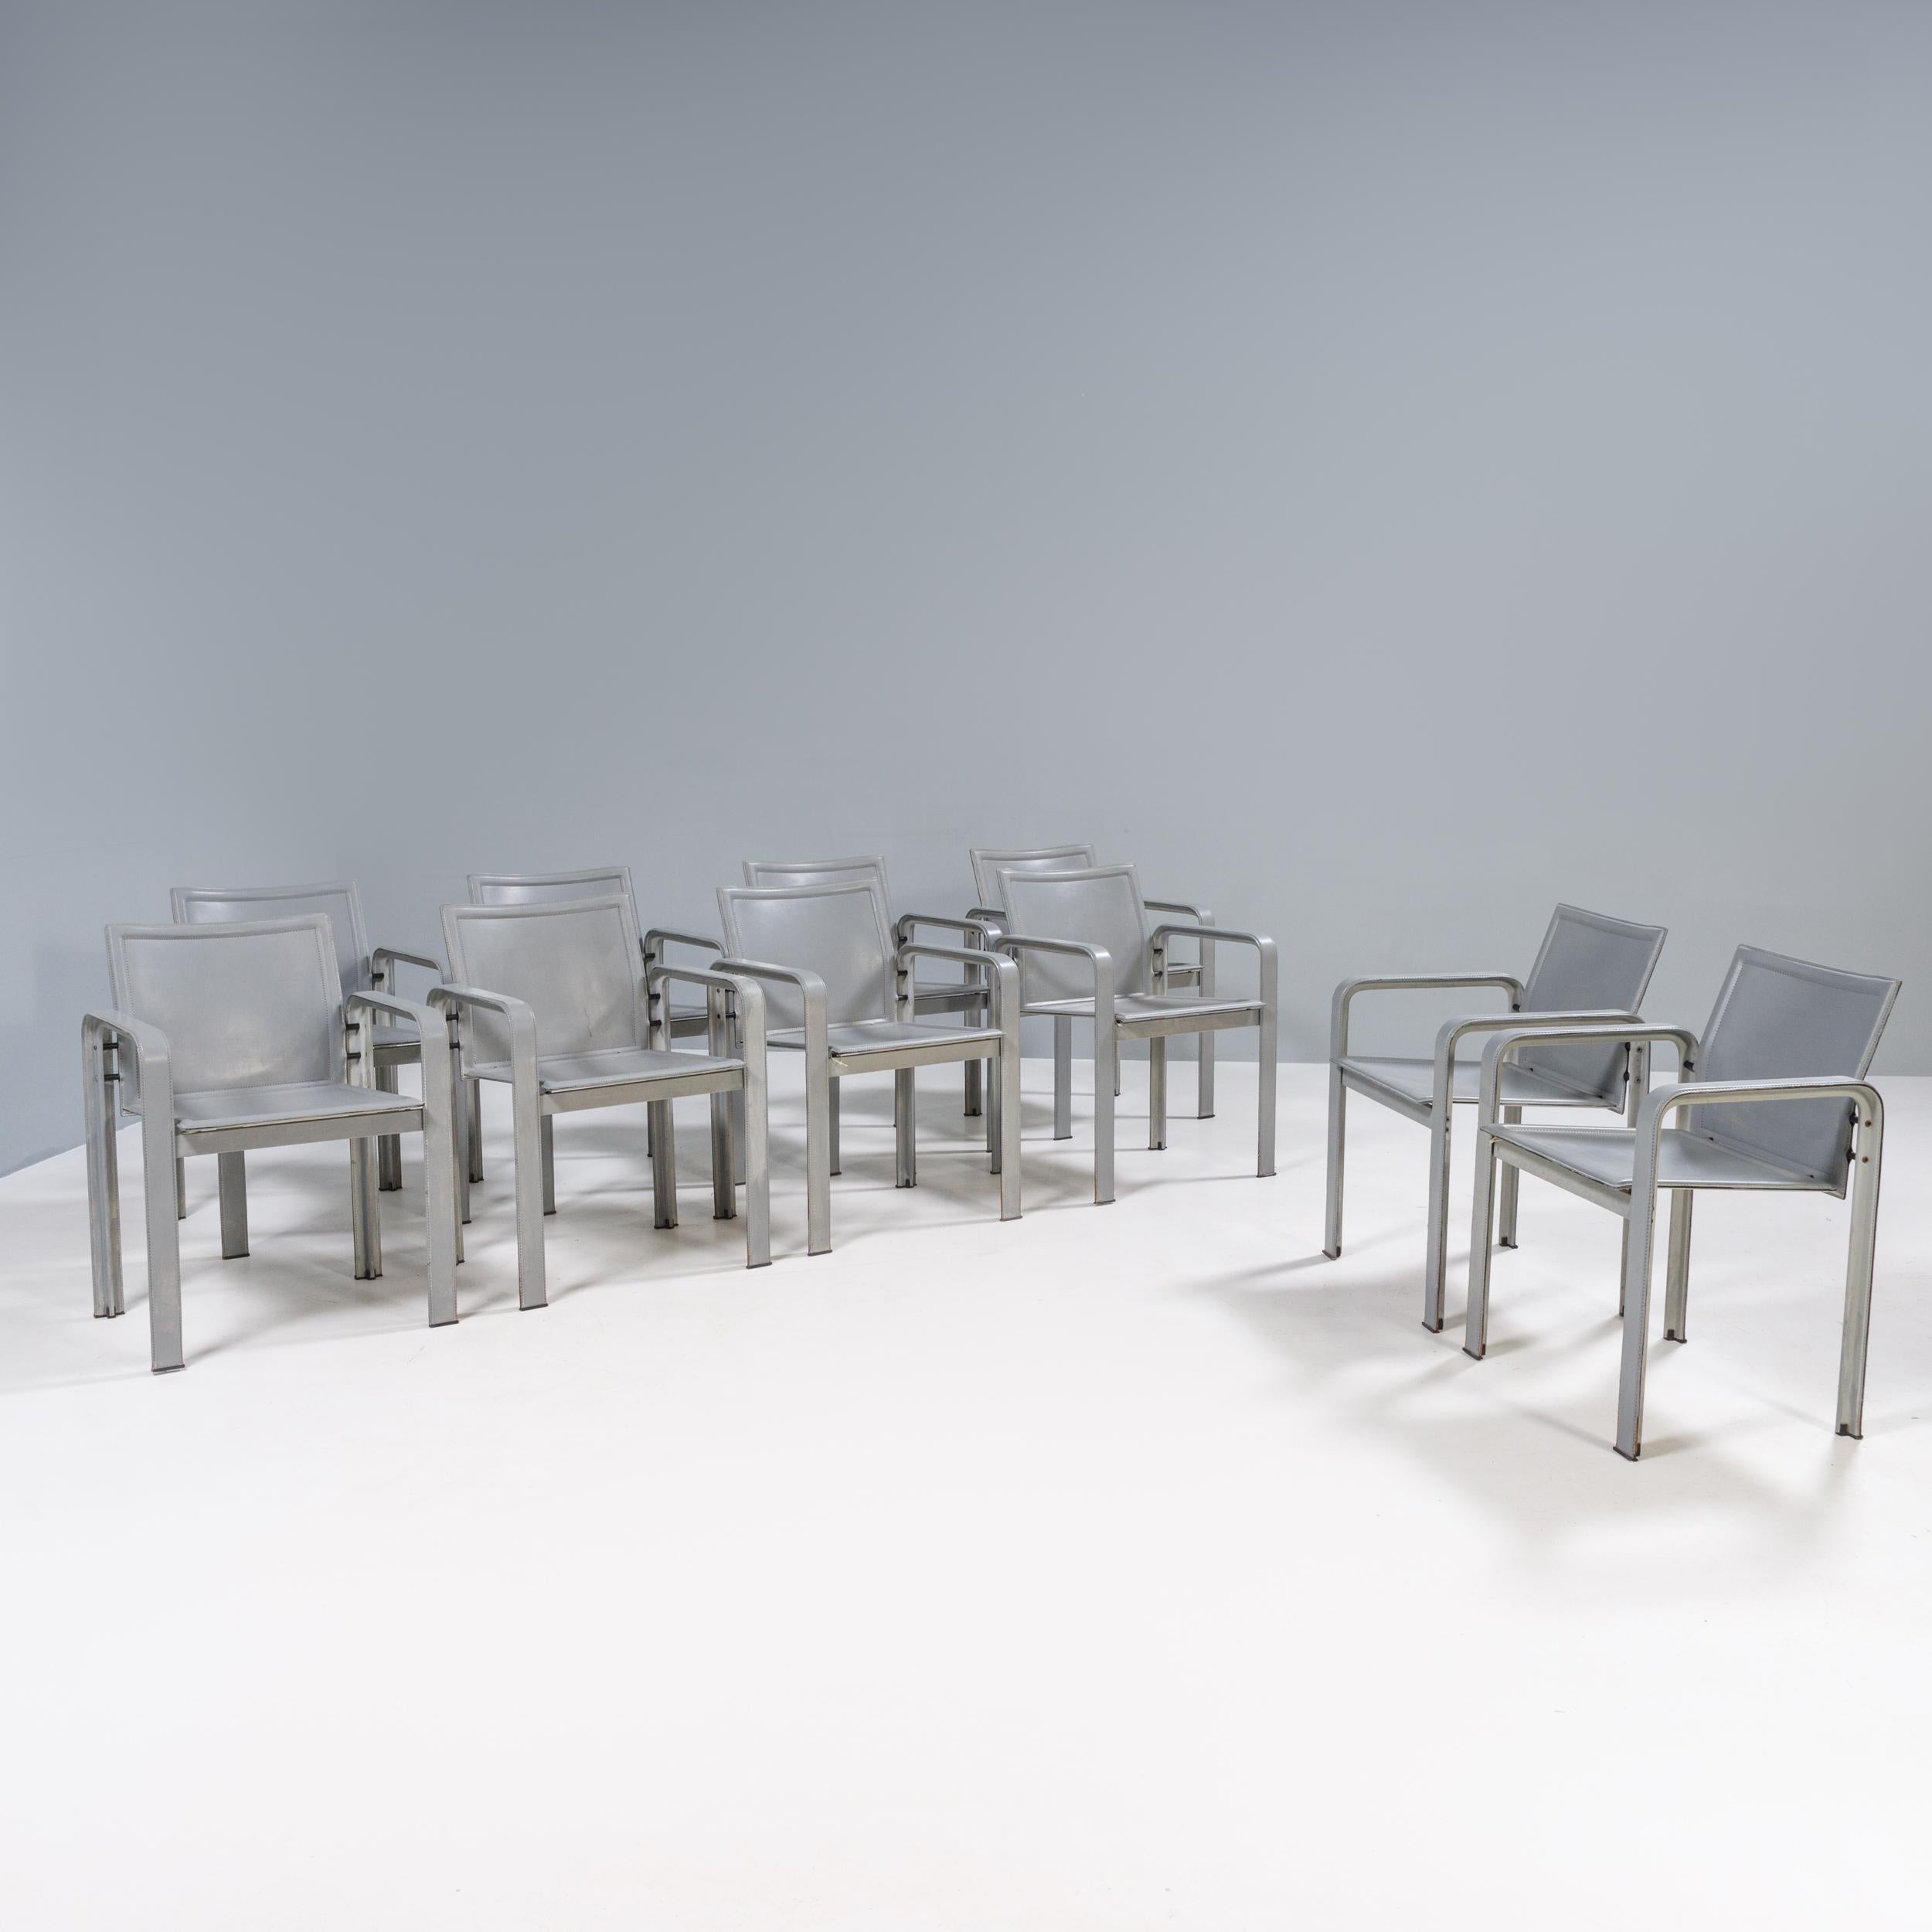 Designed by Jacques Toussaint and Patrizia Angeloni in the 1970s, the Golfo Dei Poeti chairs were manufactured by Matteo Grassi and are a fantastic example of Italian design from the period.

Constructed from a metal frame, the chairs are